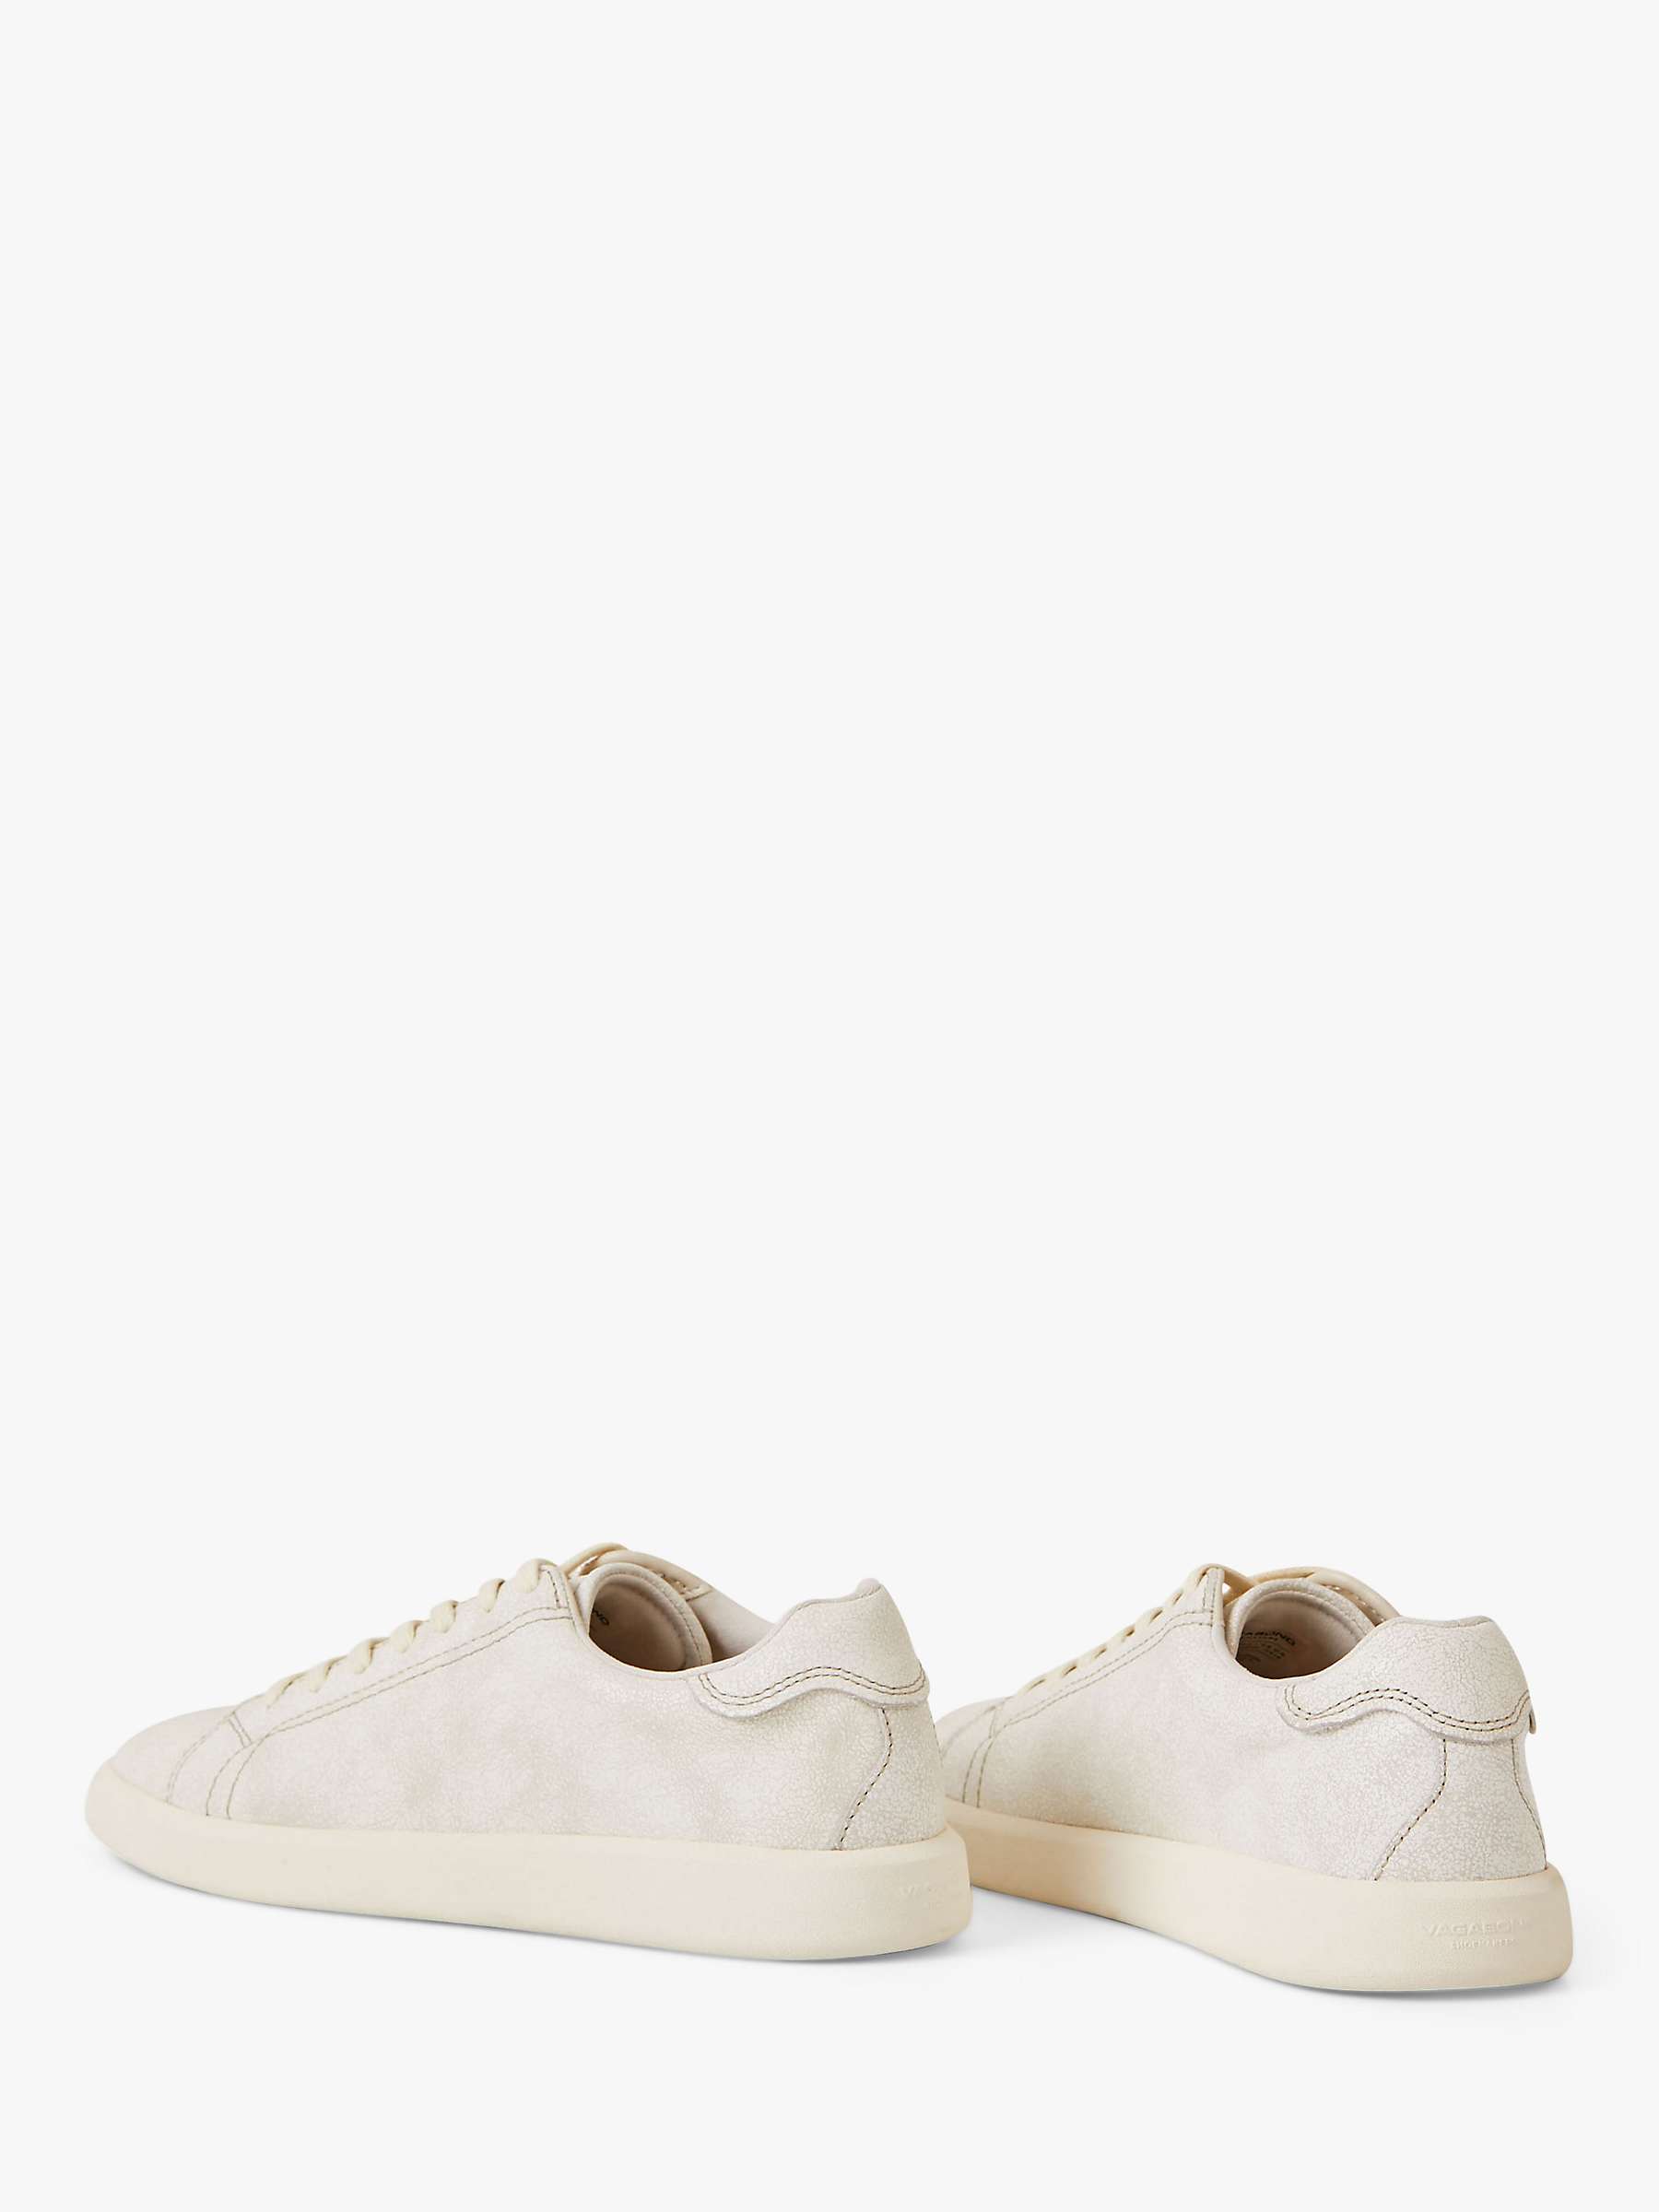 Buy Vagabond Shoemakers Maya Leather Trainers, Vintage Off White Online at johnlewis.com